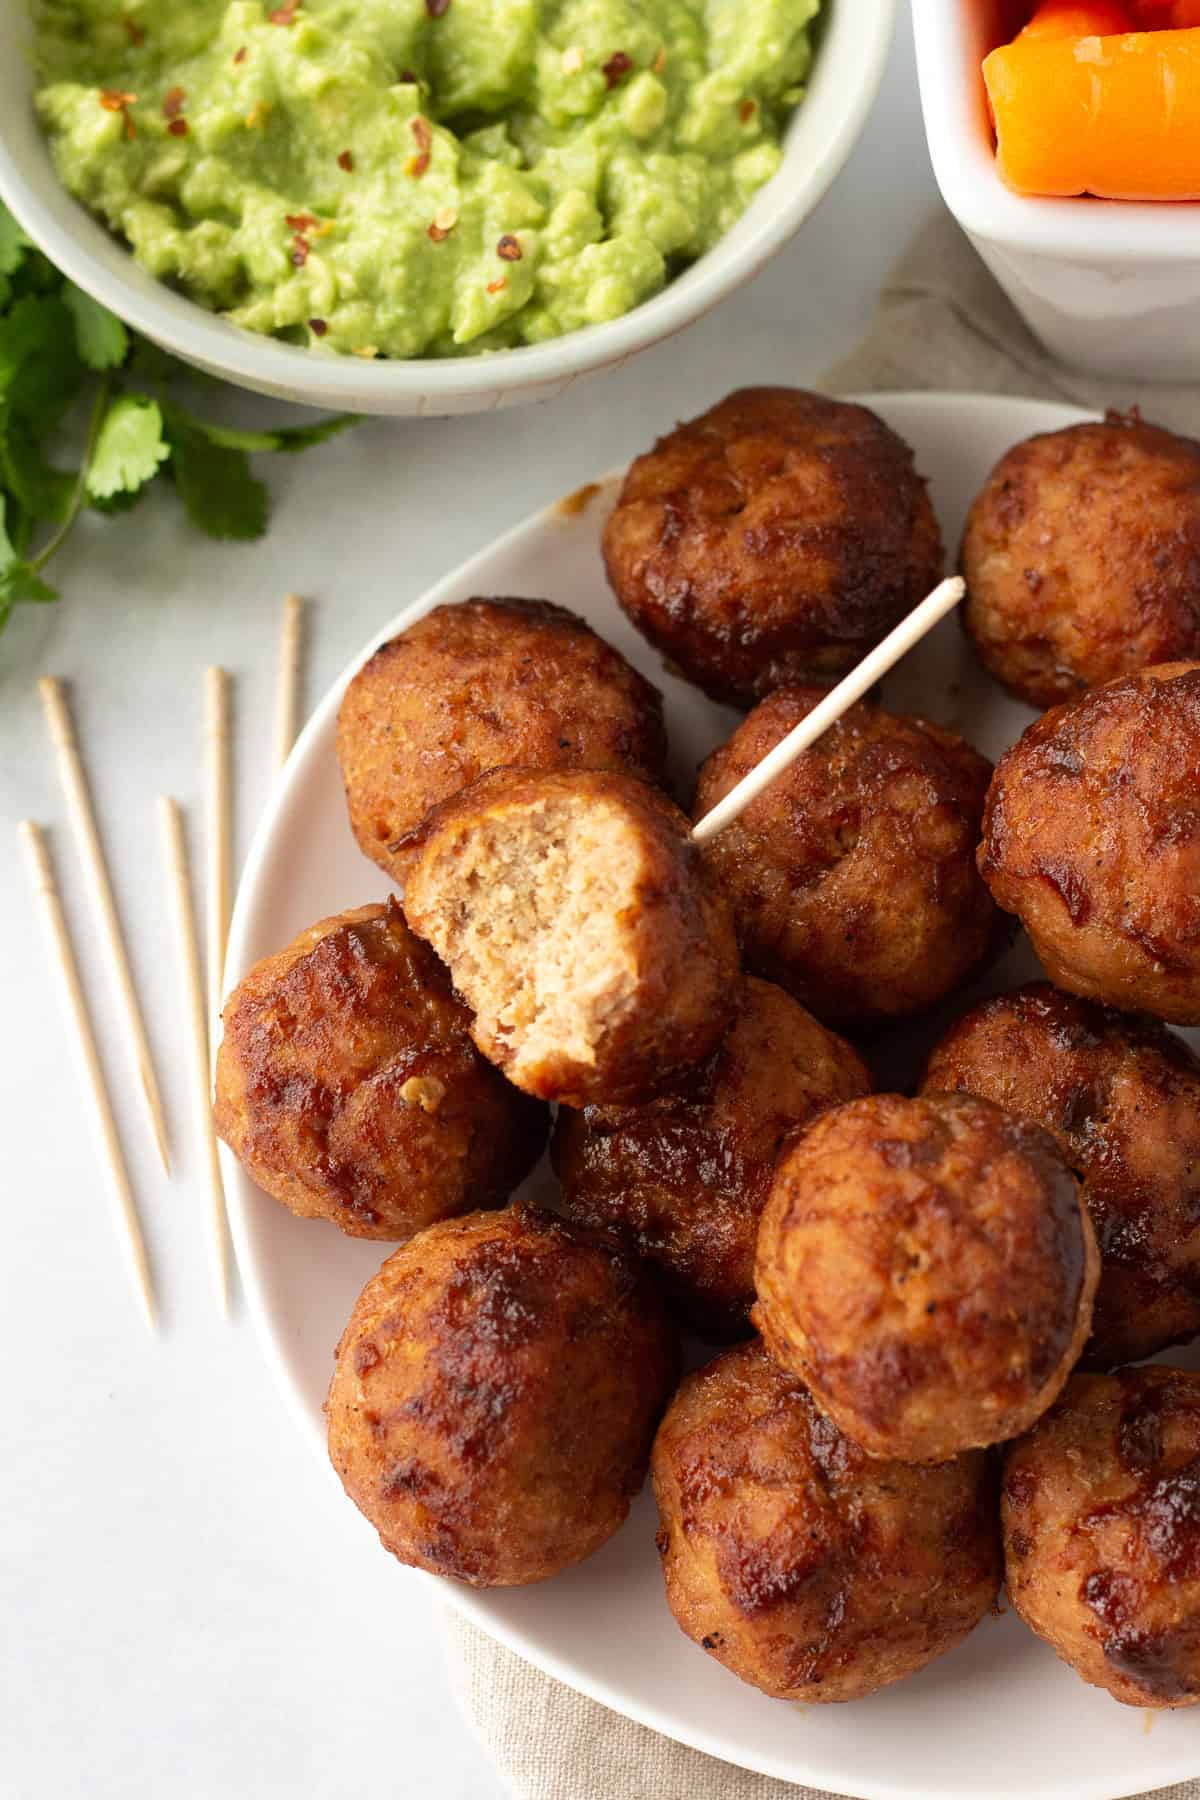 A white plate with bbq turkey meatballs piled on it. One has a toothpick in it and a bit taken out of it. Other toothpicks, guacamole, and carrots surround the plate of meatballs.